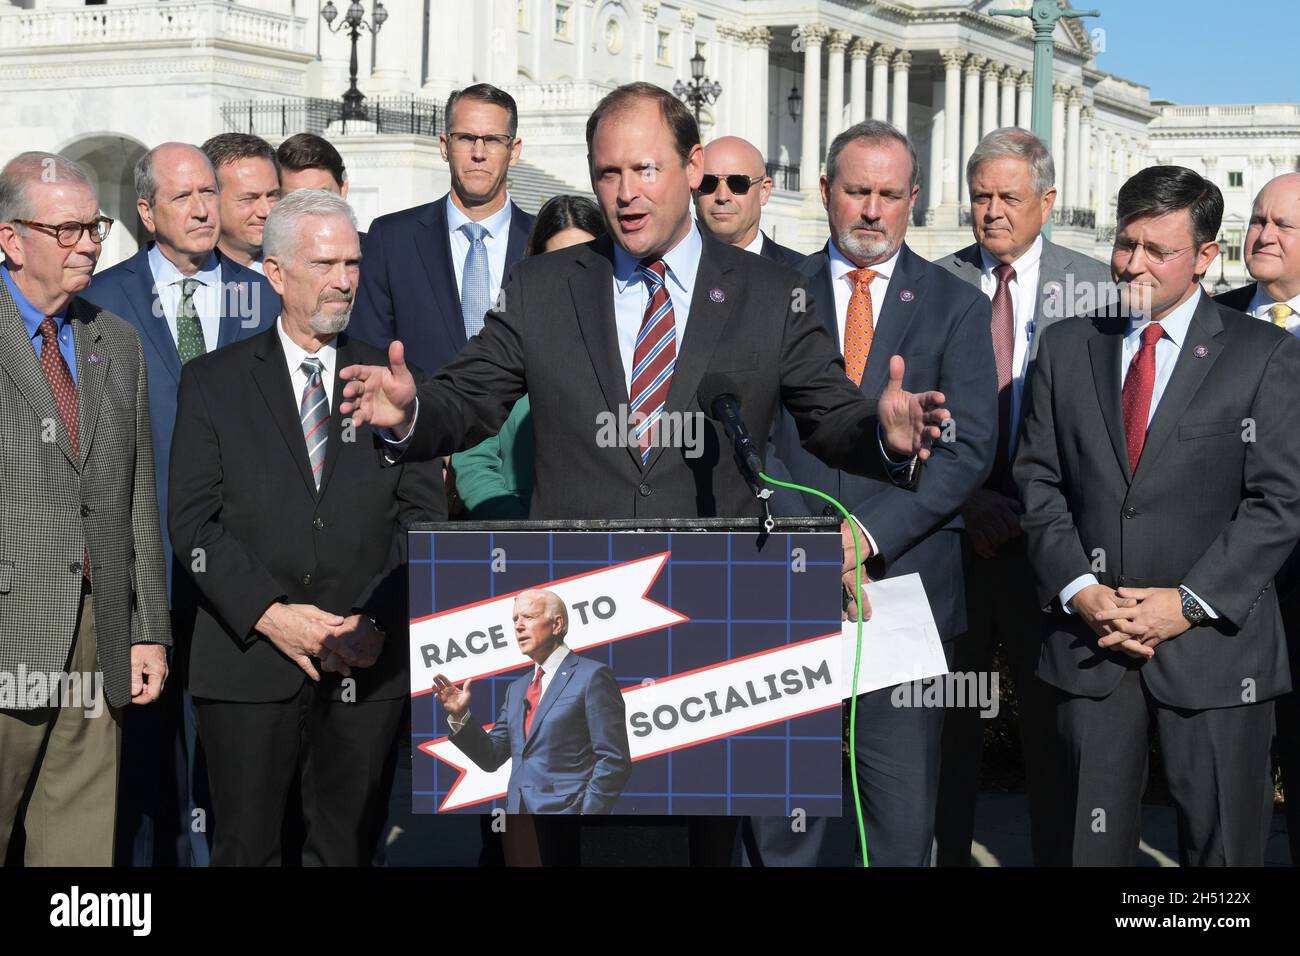 Washington, USA. 05th Nov, 2021. Representative Andy Barr (R-KY) alongside House Republican members speaks during a press conference in response to OSHA's release of Biden's vaccine mandate for private businesses, at House Triangle/Capitol Hill. Credit: SOPA Images Limited/Alamy Live News Stock Photo